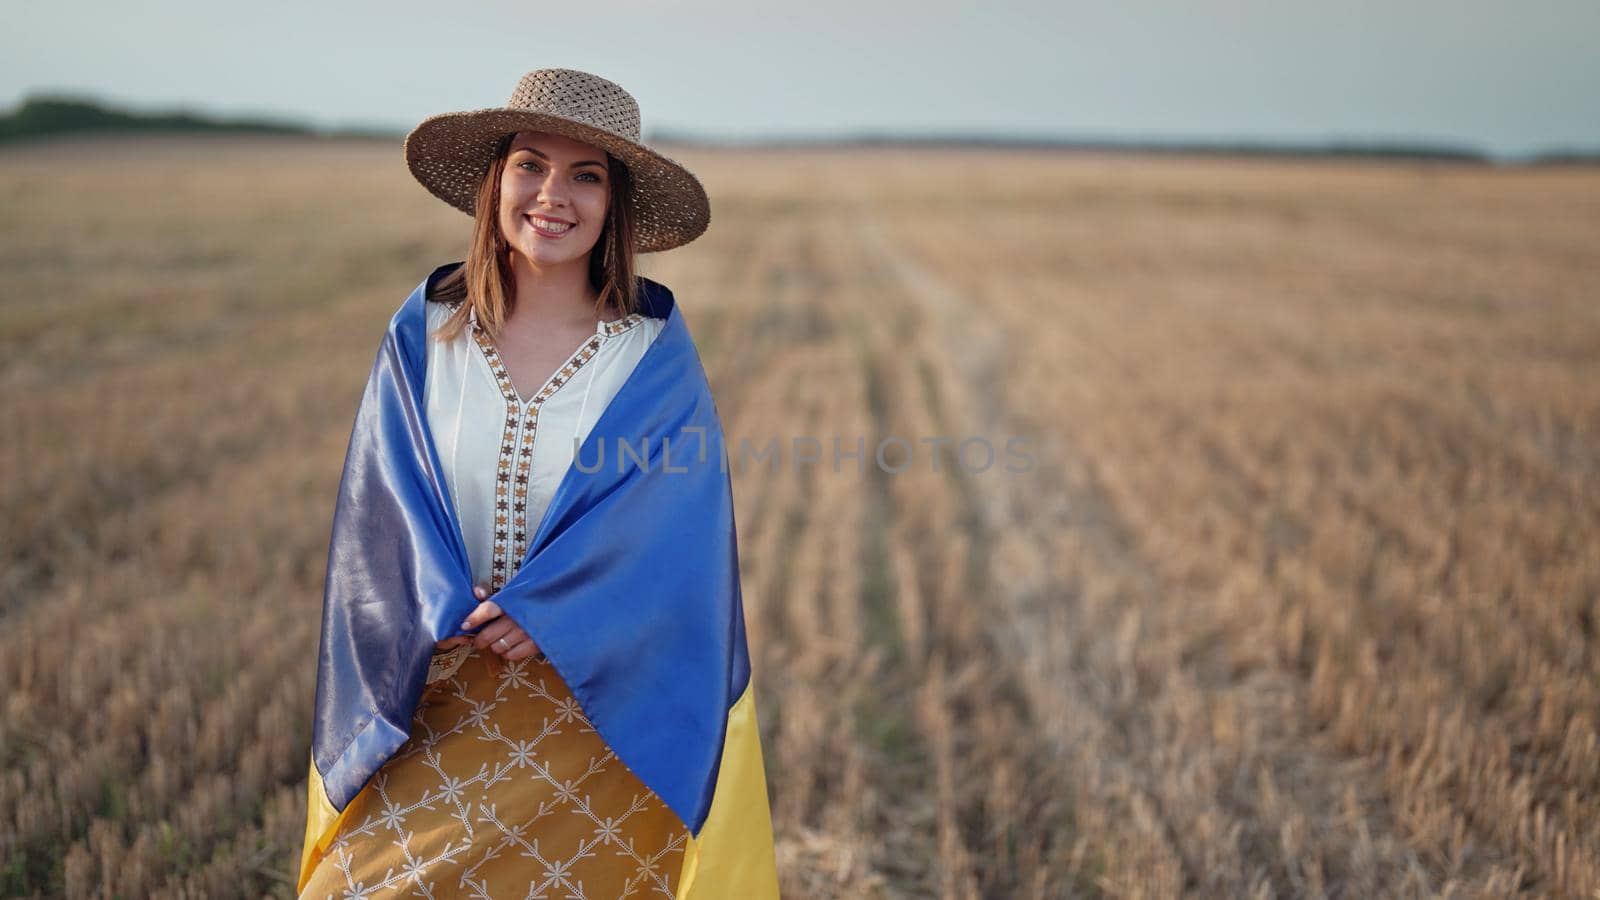 Smiling ukrainian woman with national flag in wheat field after harvesting. Charming rural lady in embroidery vyshyvanka. Ukraine, independence, freedom, patriot symbol, victory in war. by kristina_kokhanova